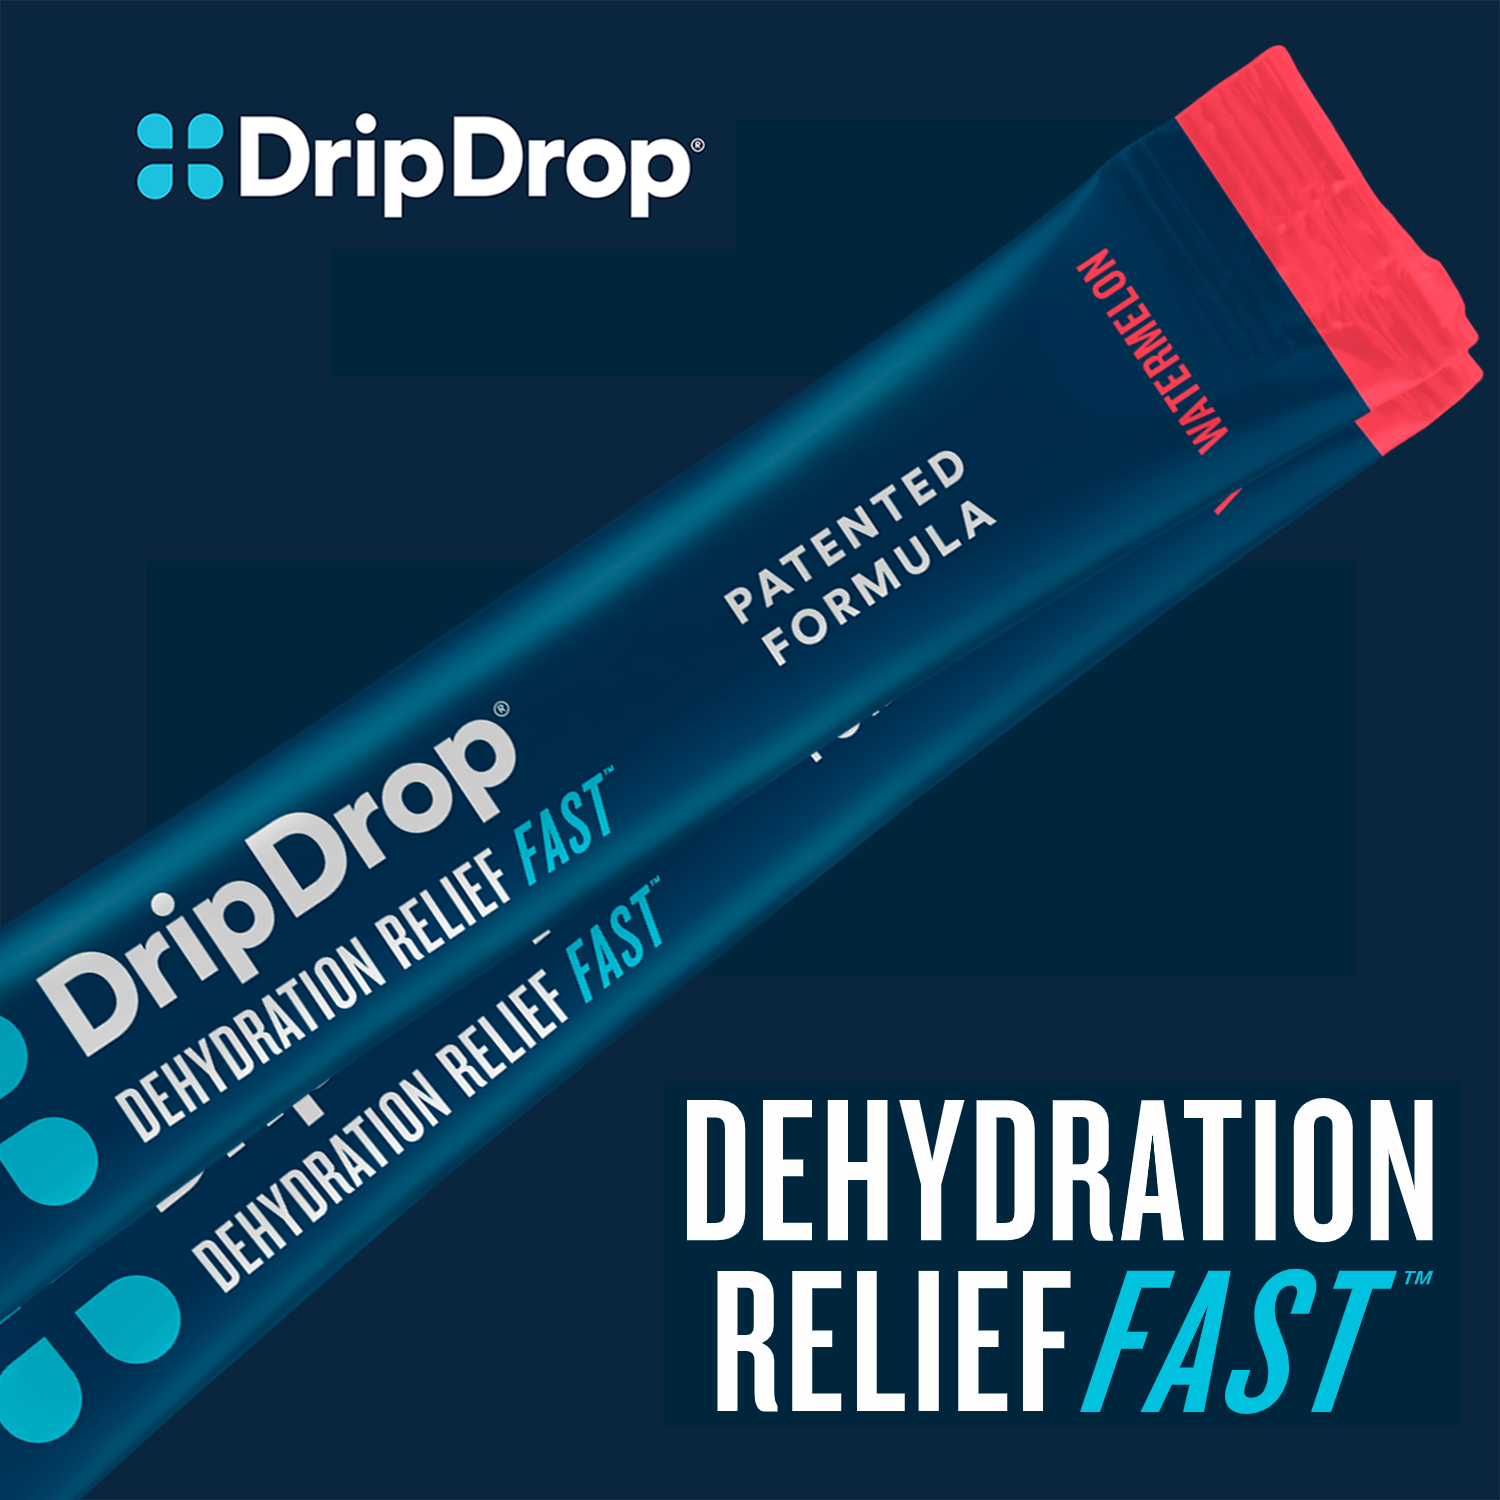 Free Sample of DripDrop Watermelon Hydration Relief Drink Mix